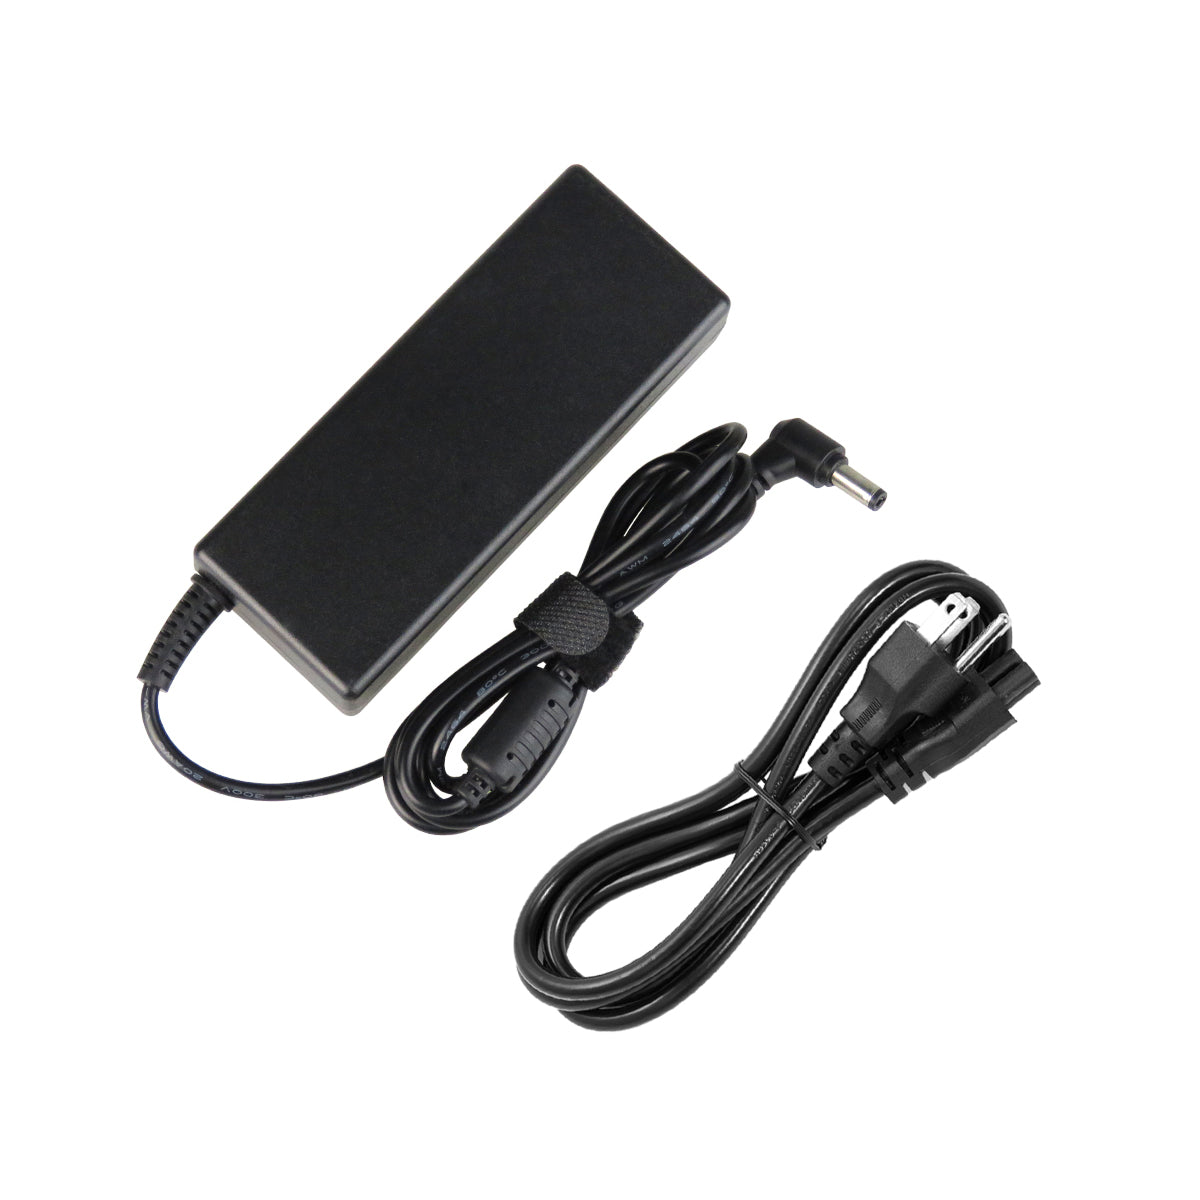 AC Adapter Charger for Toshiba Satellite p75-a7100 Notebook.